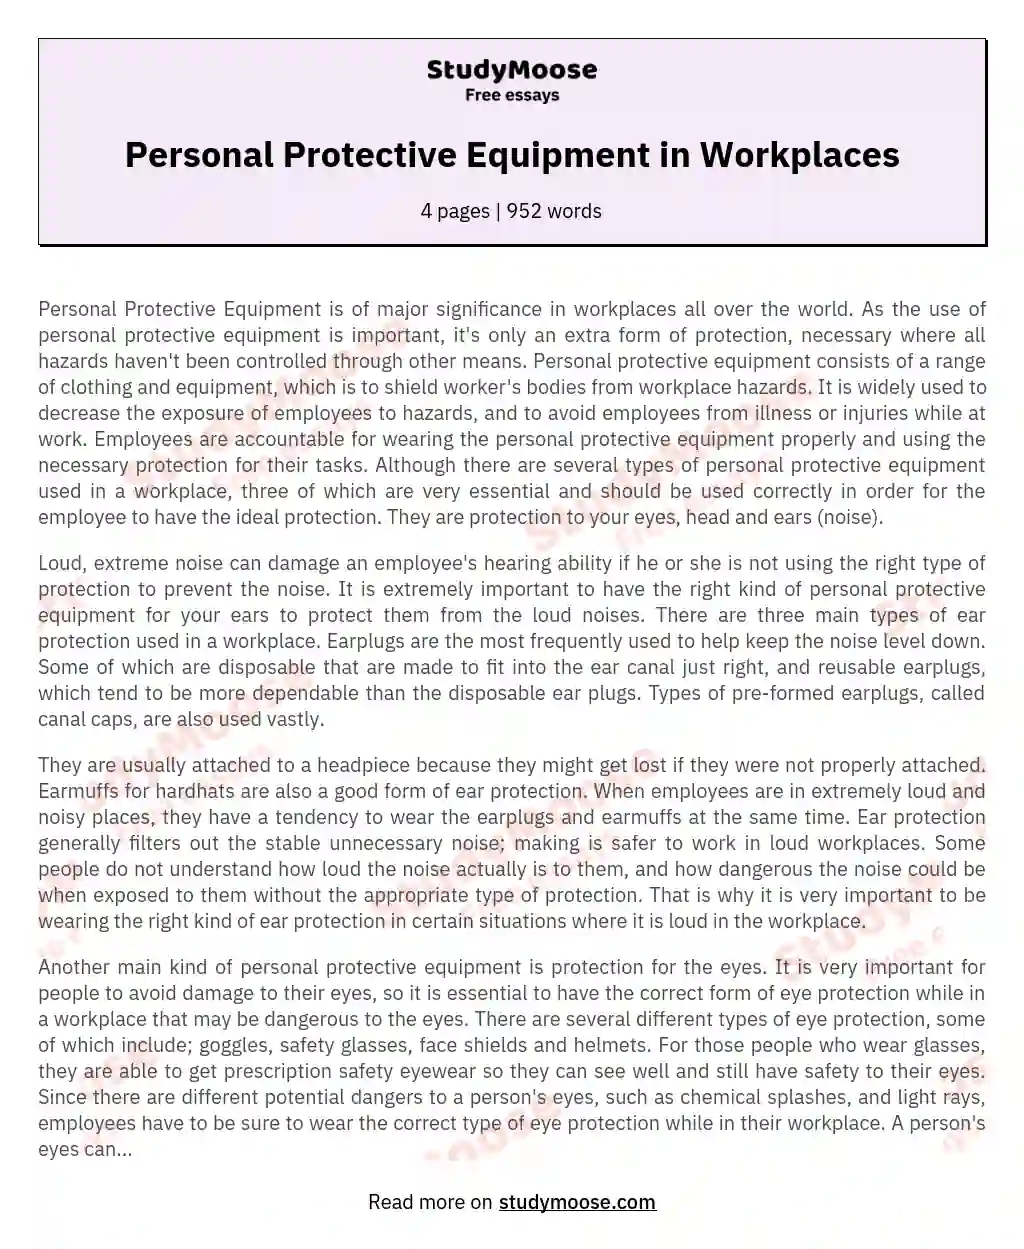 Personal Protective Equipment in Workplaces essay